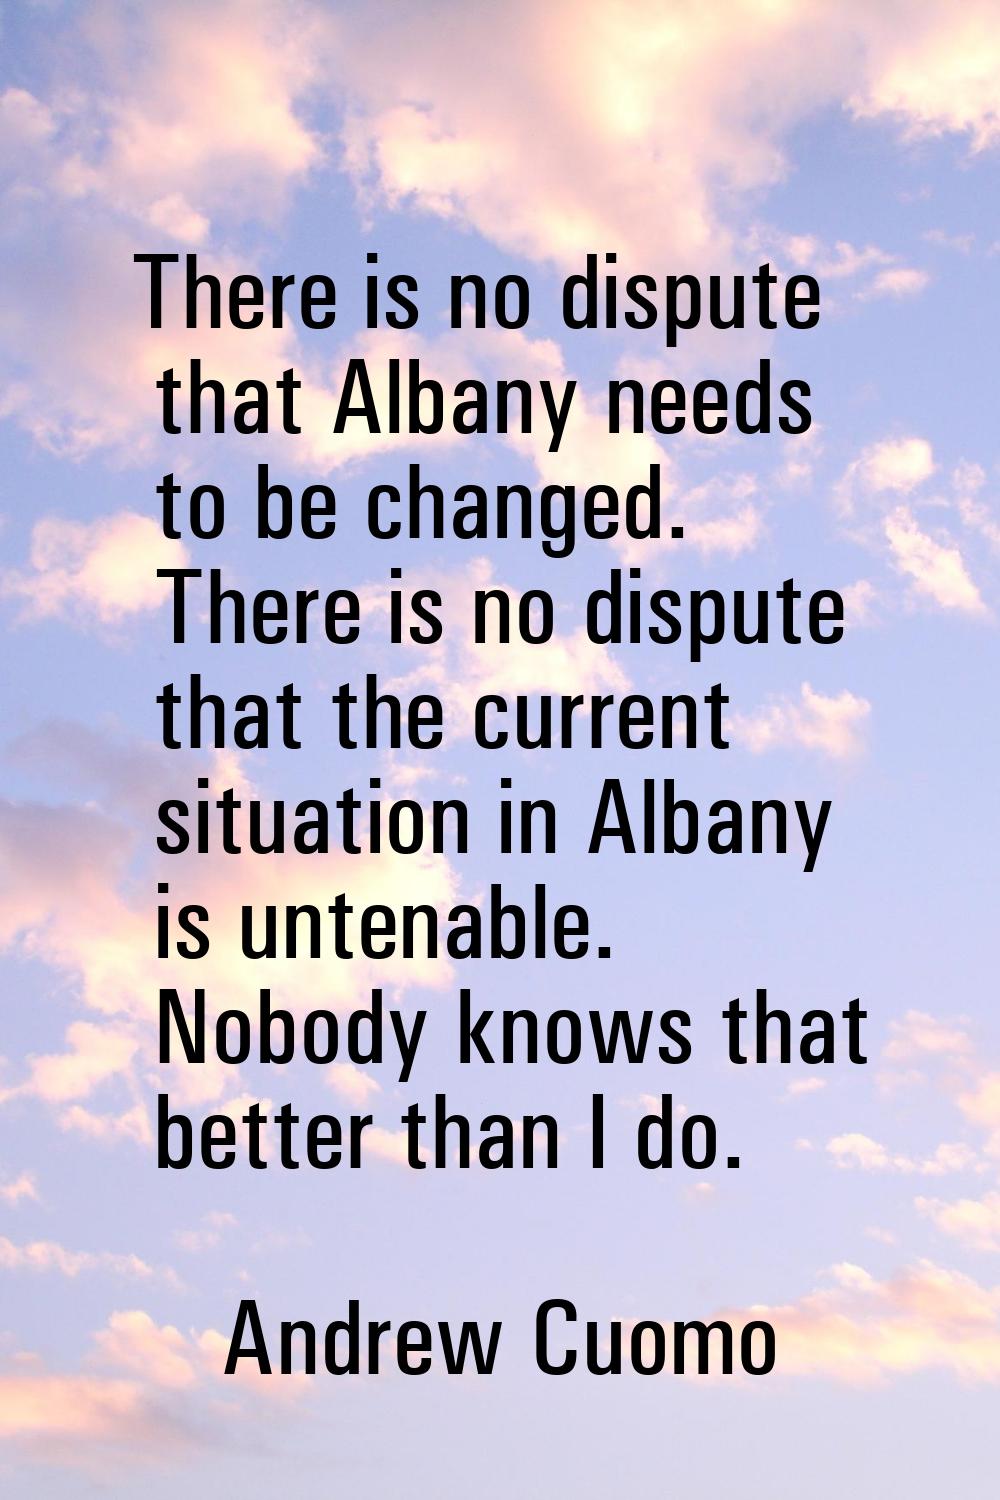 There is no dispute that Albany needs to be changed. There is no dispute that the current situation